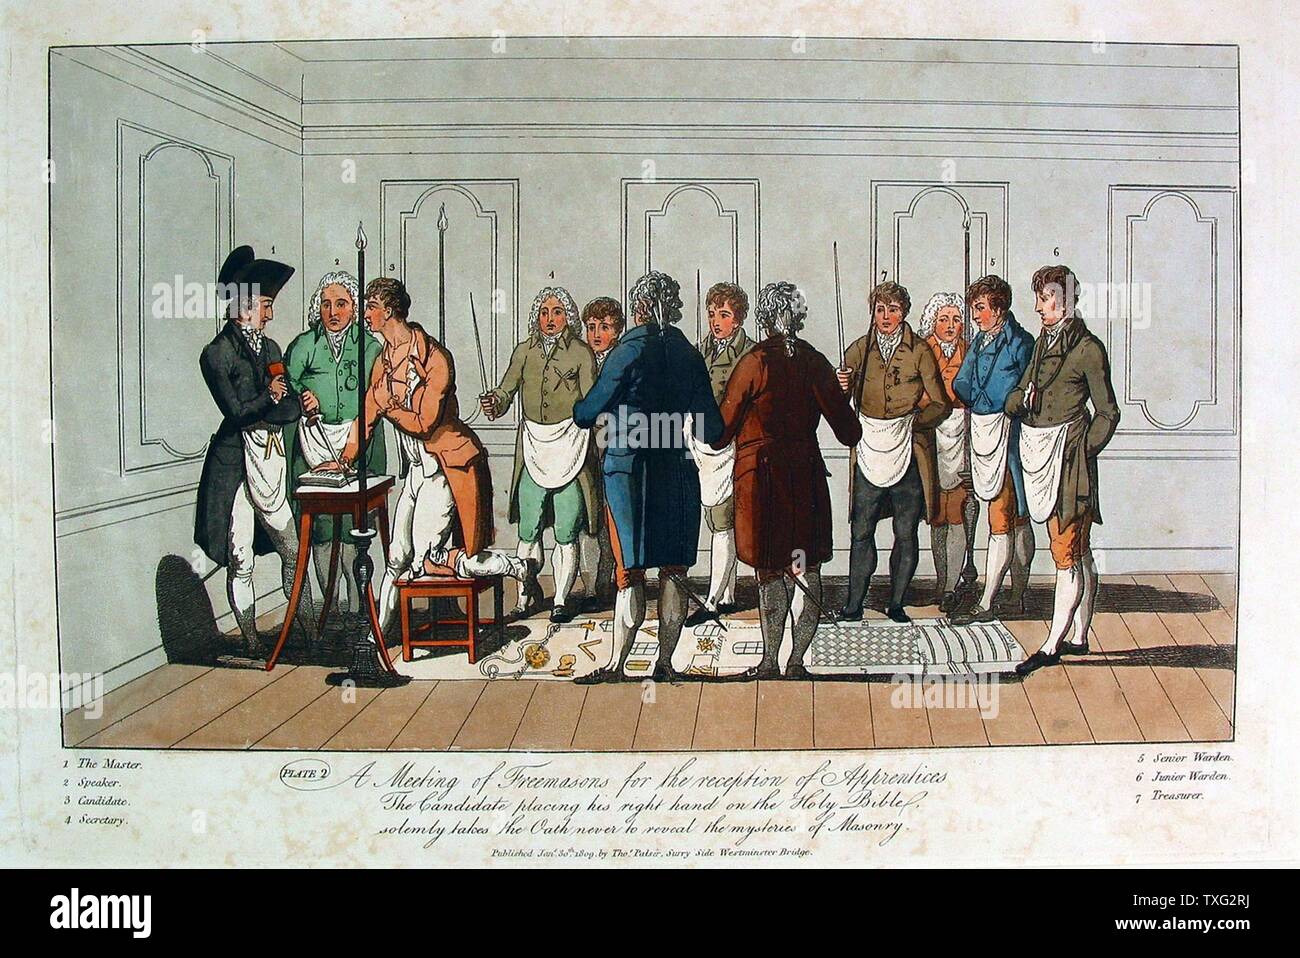 Inauguration of an Apprentice II Early 19th century  English lithograph (25 cm x 39) after the French engravers known as 'Gabanon' in the middle of the 18th century. The applicant is lead into the temple blindfolded. Paris, musée de la Franc-Maçonnerie Stock Photo